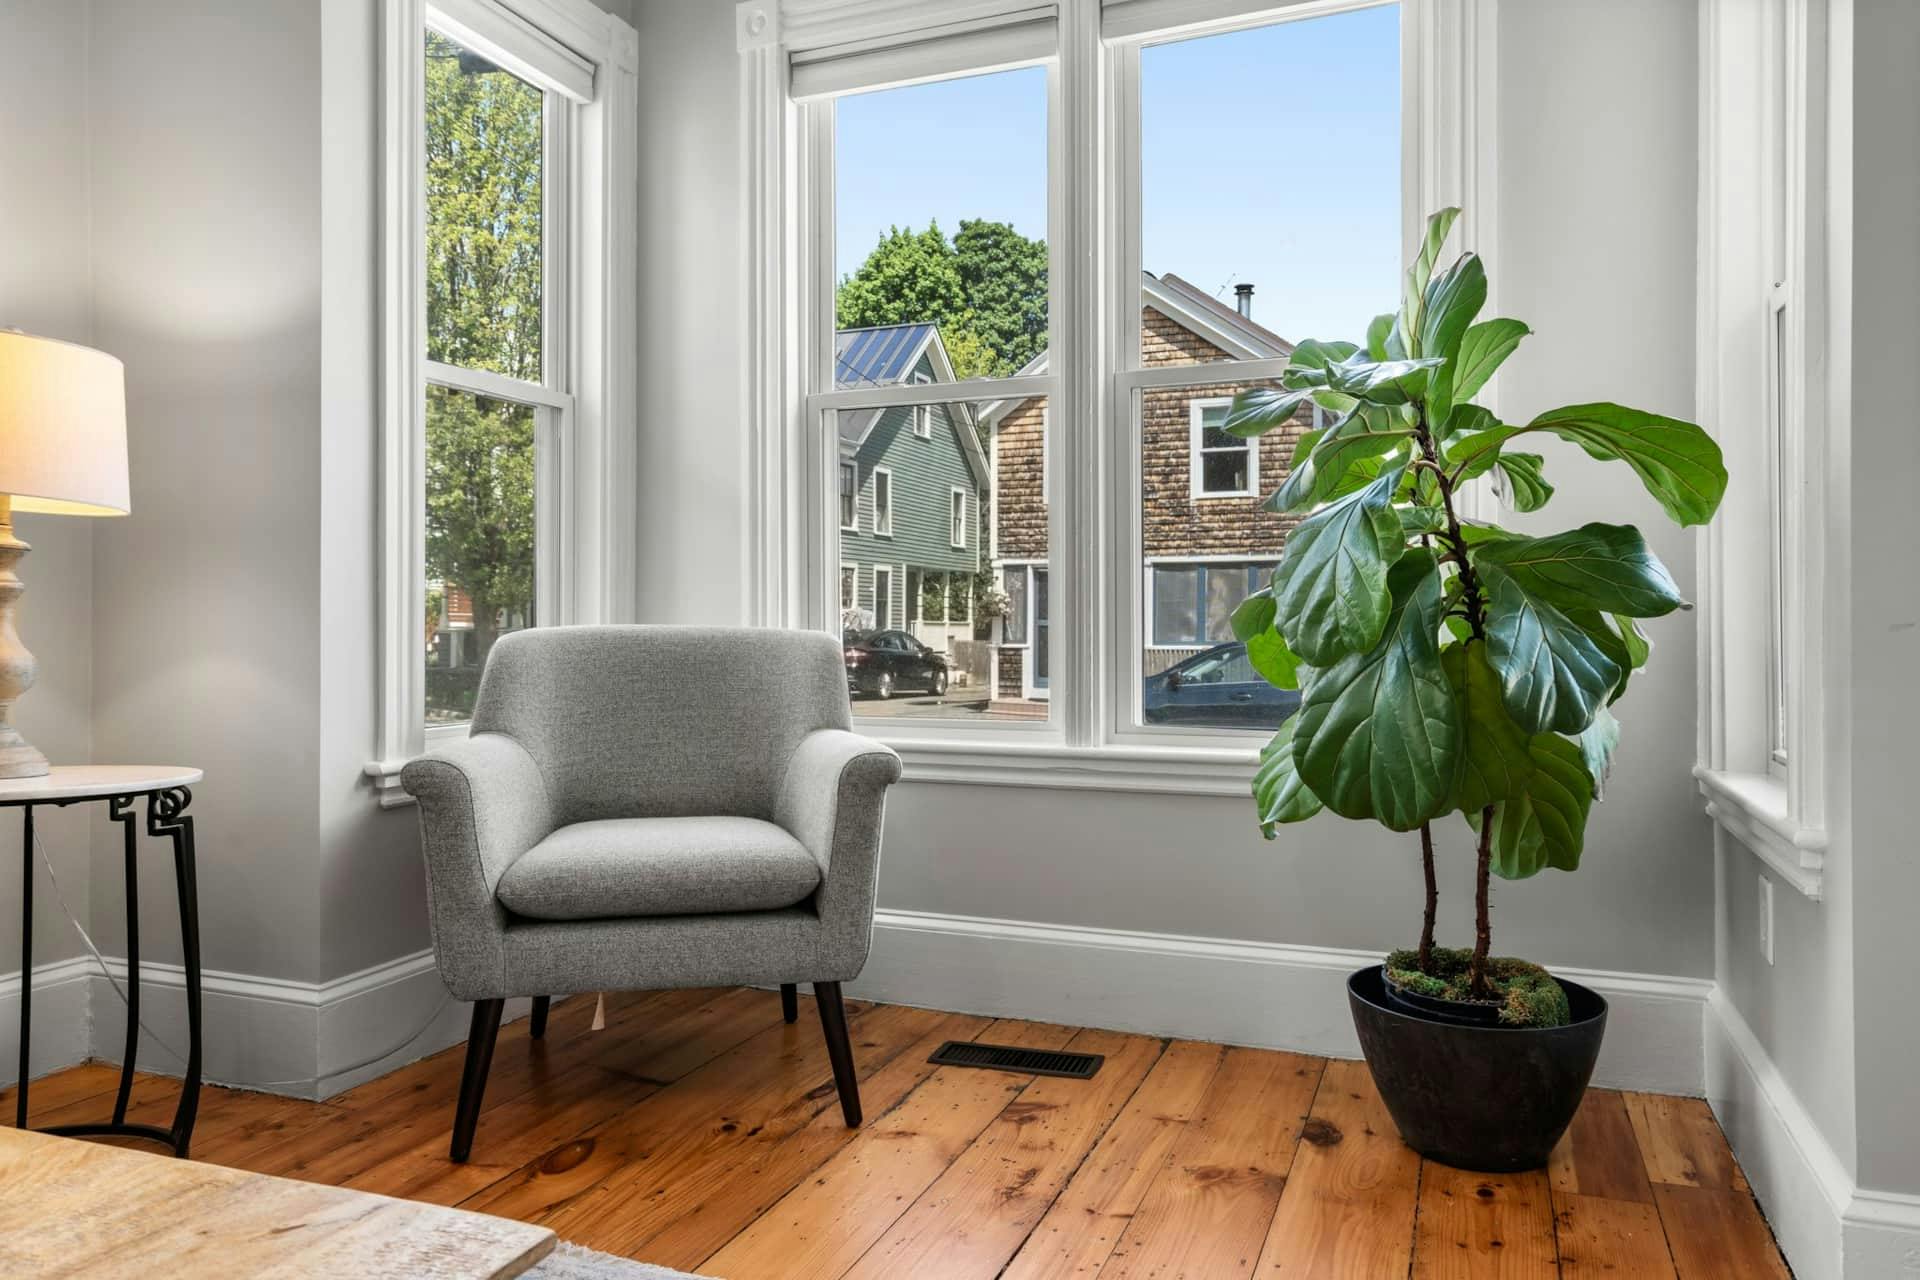 Room by the window with plant and chair